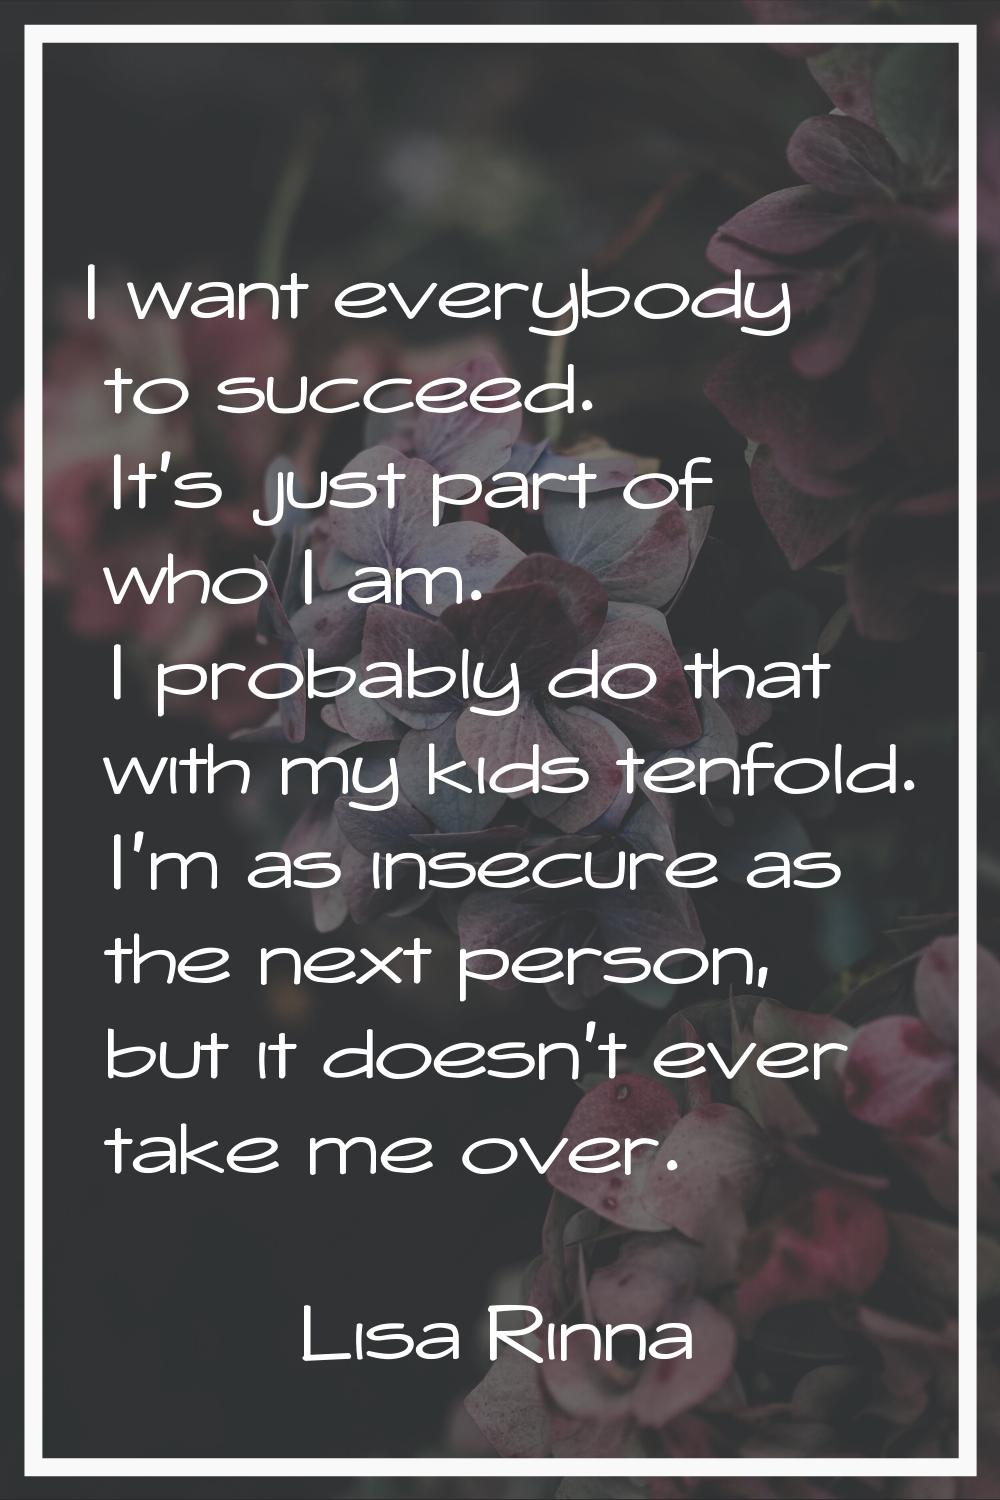 I want everybody to succeed. It's just part of who I am. I probably do that with my kids tenfold. I